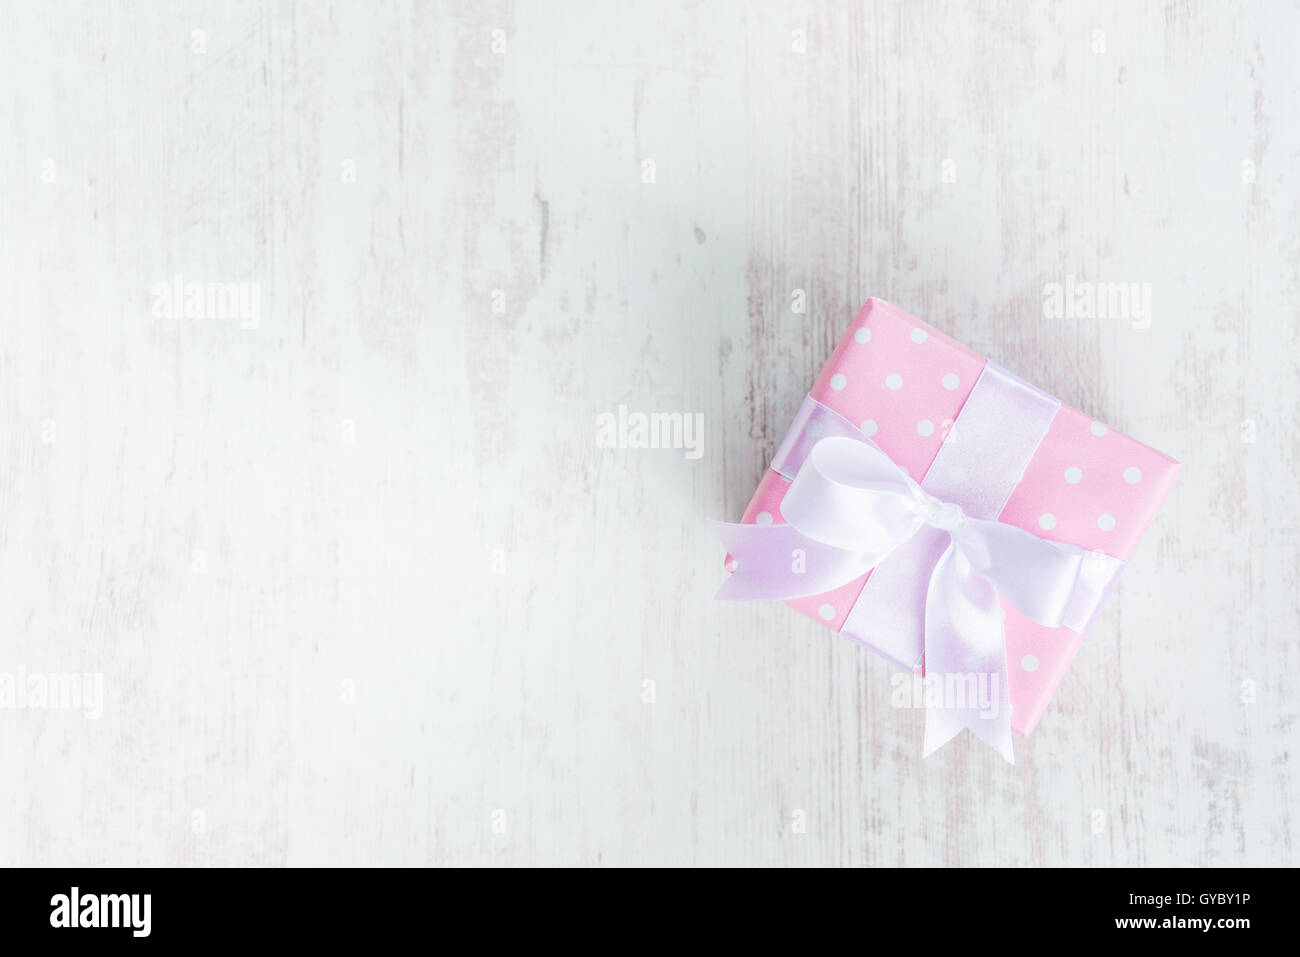 Top view of a gift box wrapped in pink dotted paper and tied satin bow over a white wood background. Stock Photo